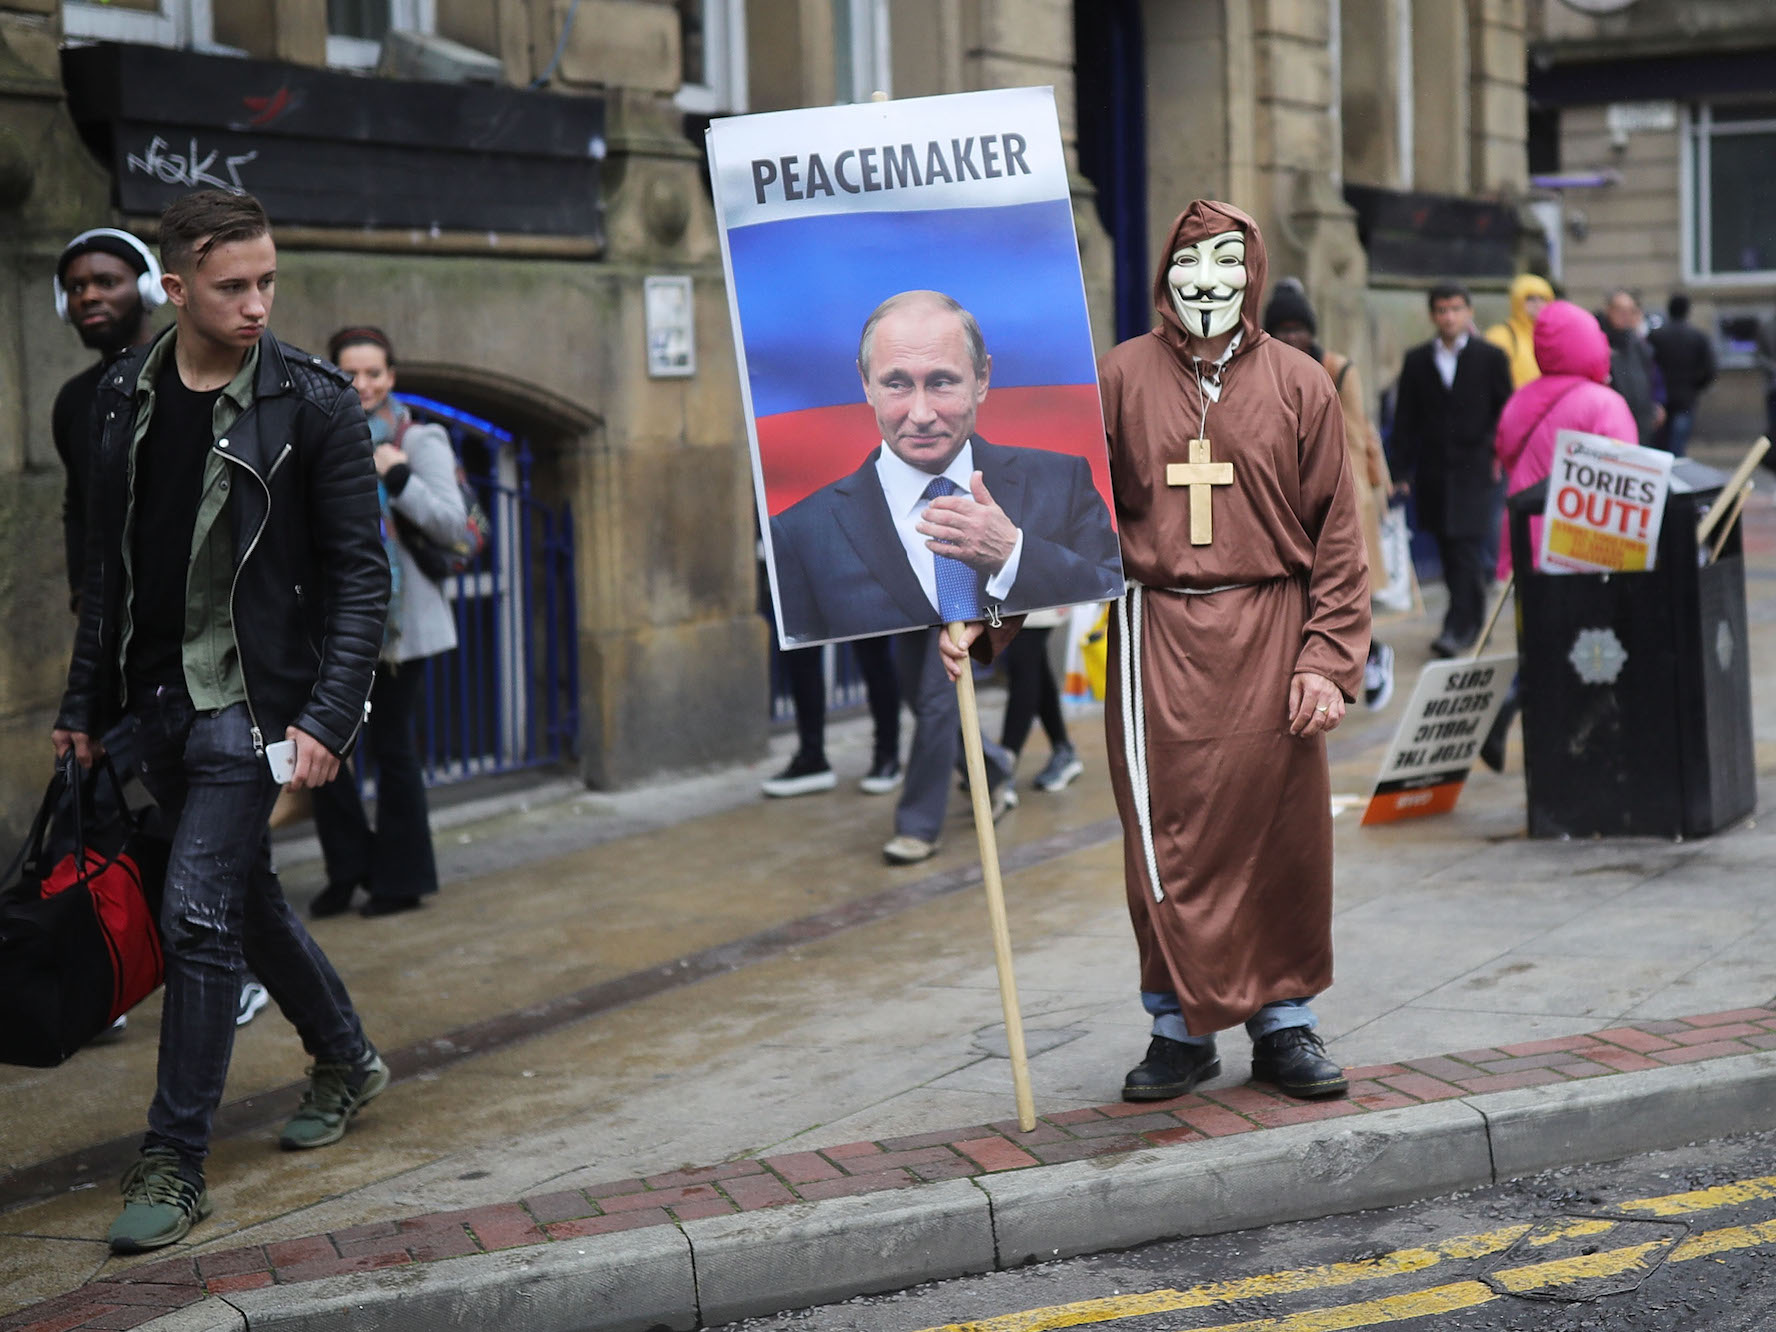 A man dressed up in a mask and holding a sign with Vladimir Putin on it saying 'Peacemaker' takes part in anti-Brexit and anti-austerity protests as the Conservative party annual conference gets underway at Manchester Central on October 1, 2017 in Manchester, England. Five-hundred thousand people are expected to take part in the protests with police mounting an unprecedented security operation of a thousand officers and extra armed police to protect Conservative party conference delegates. (Photo by Christopher Furlong/Getty Images)